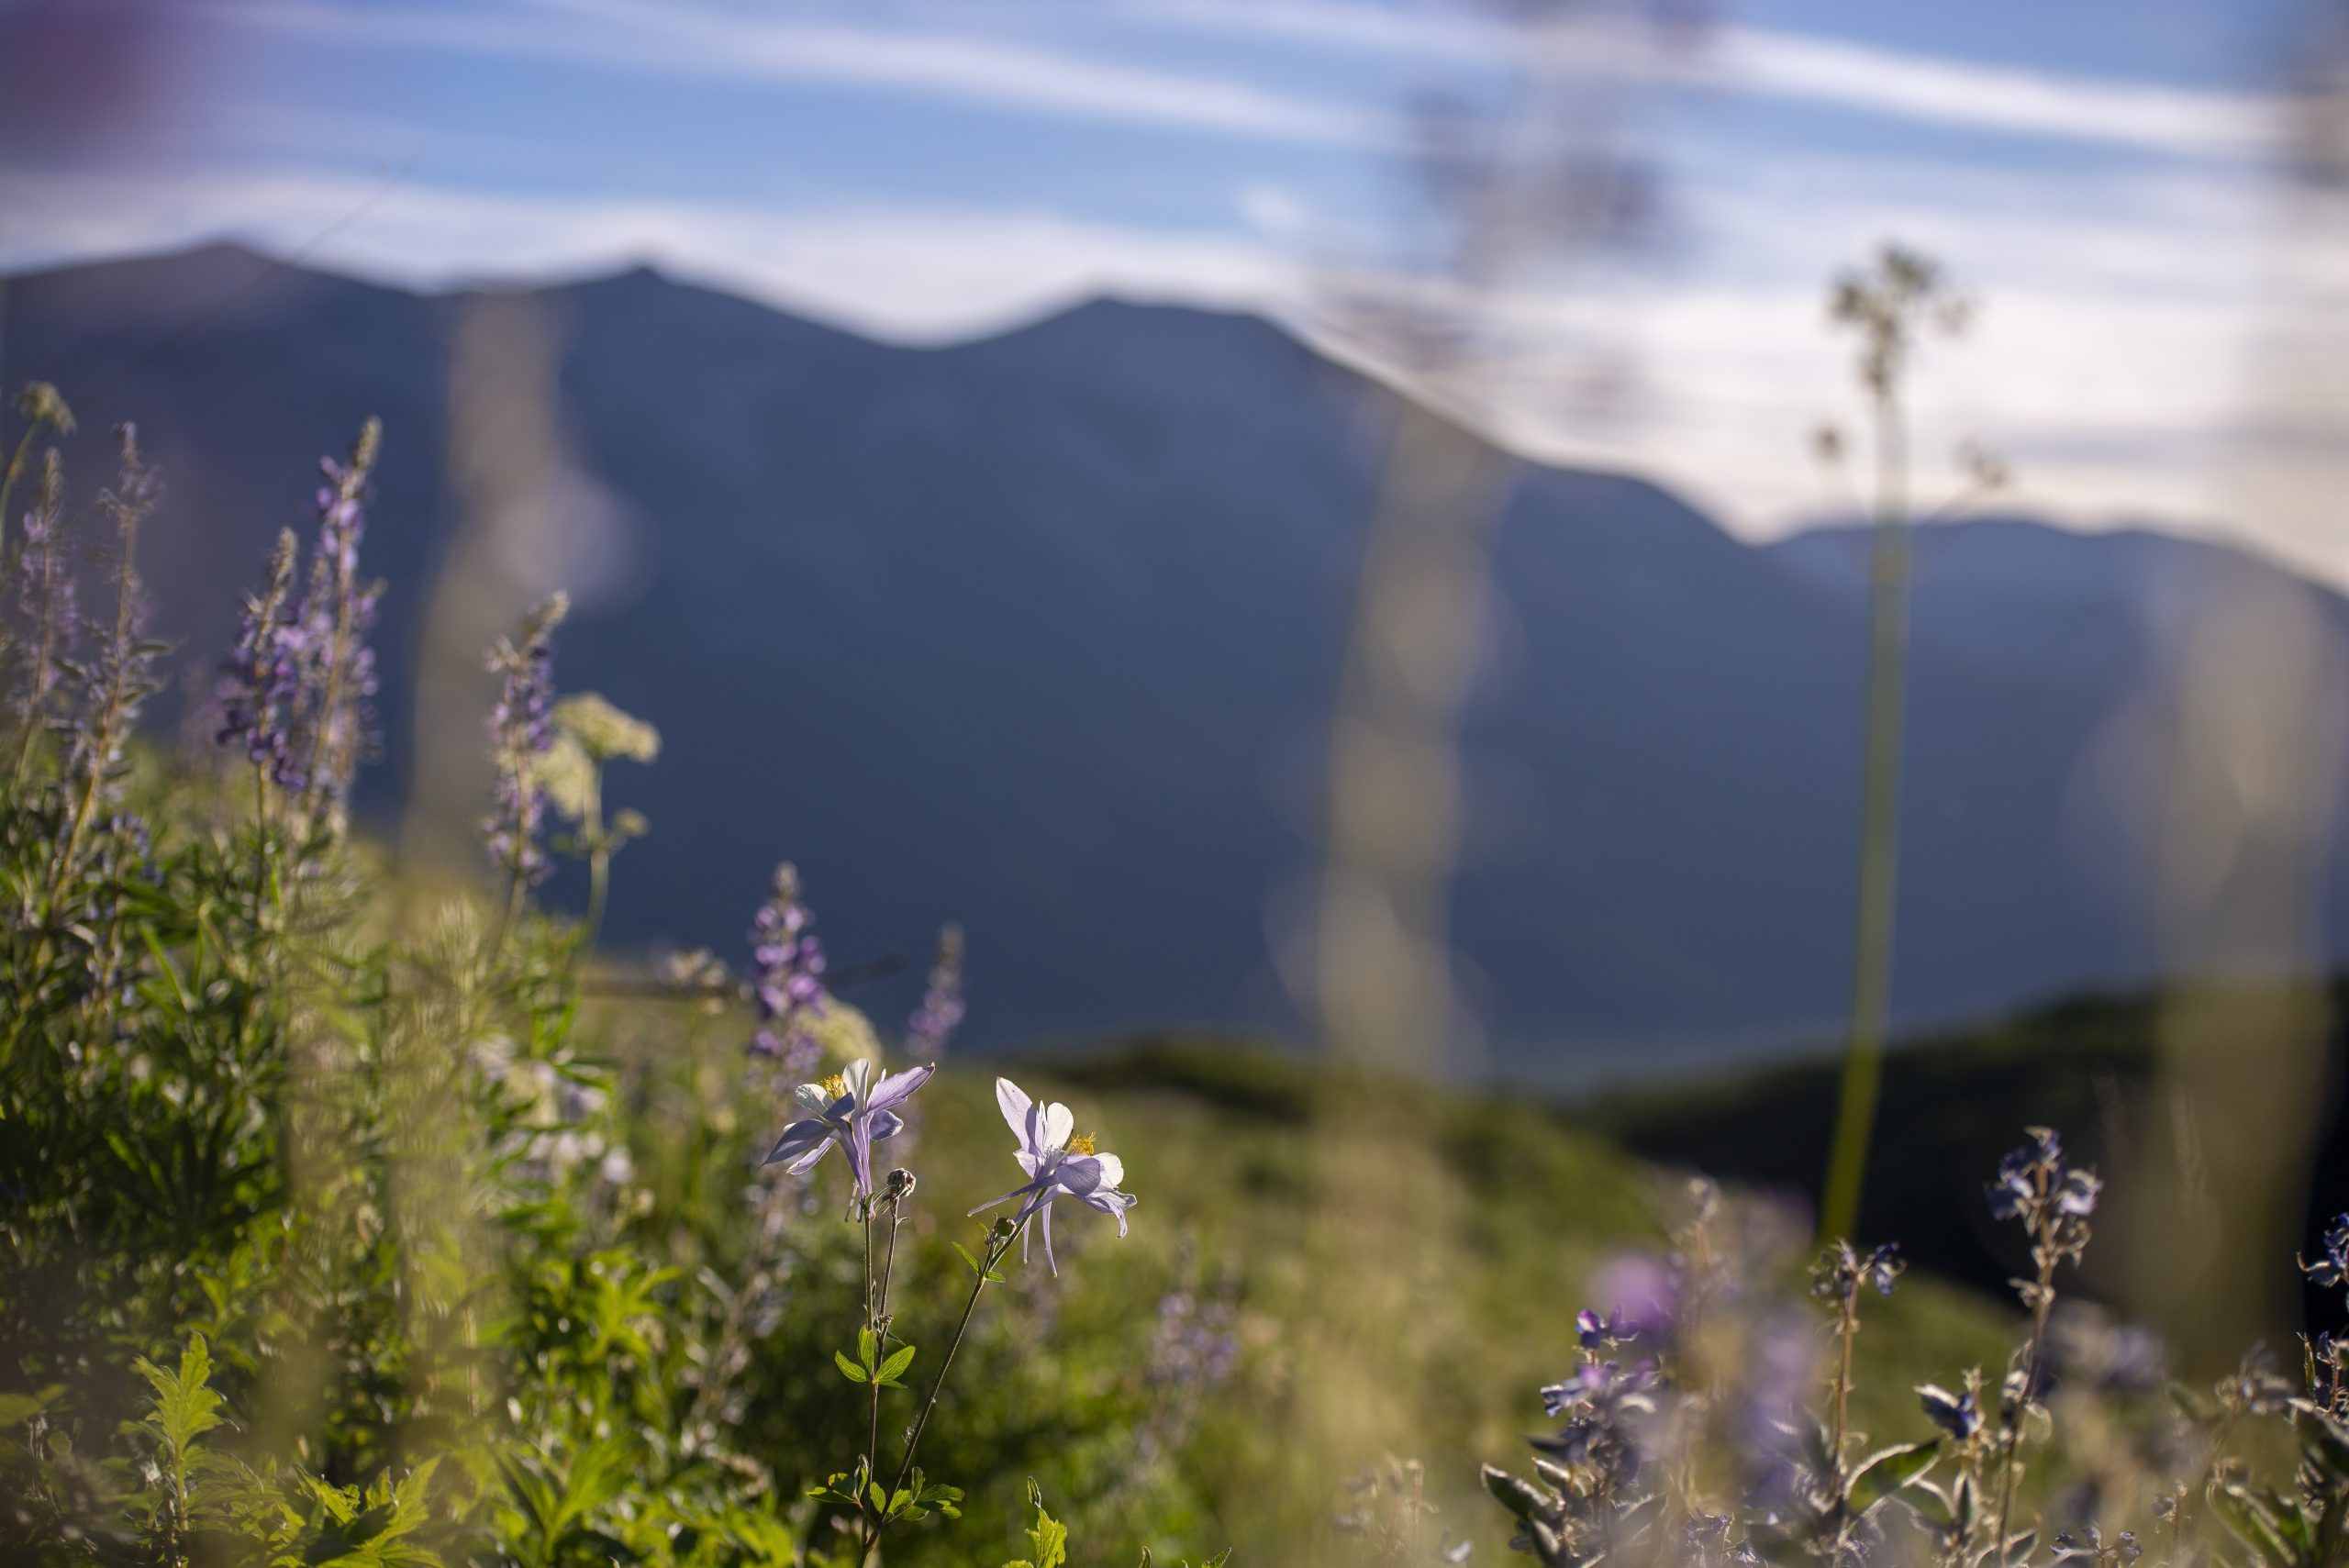 Visit Crested Butte in July for a glimpse of columbine and lupine wildflowers near Crested Butte, Colorado